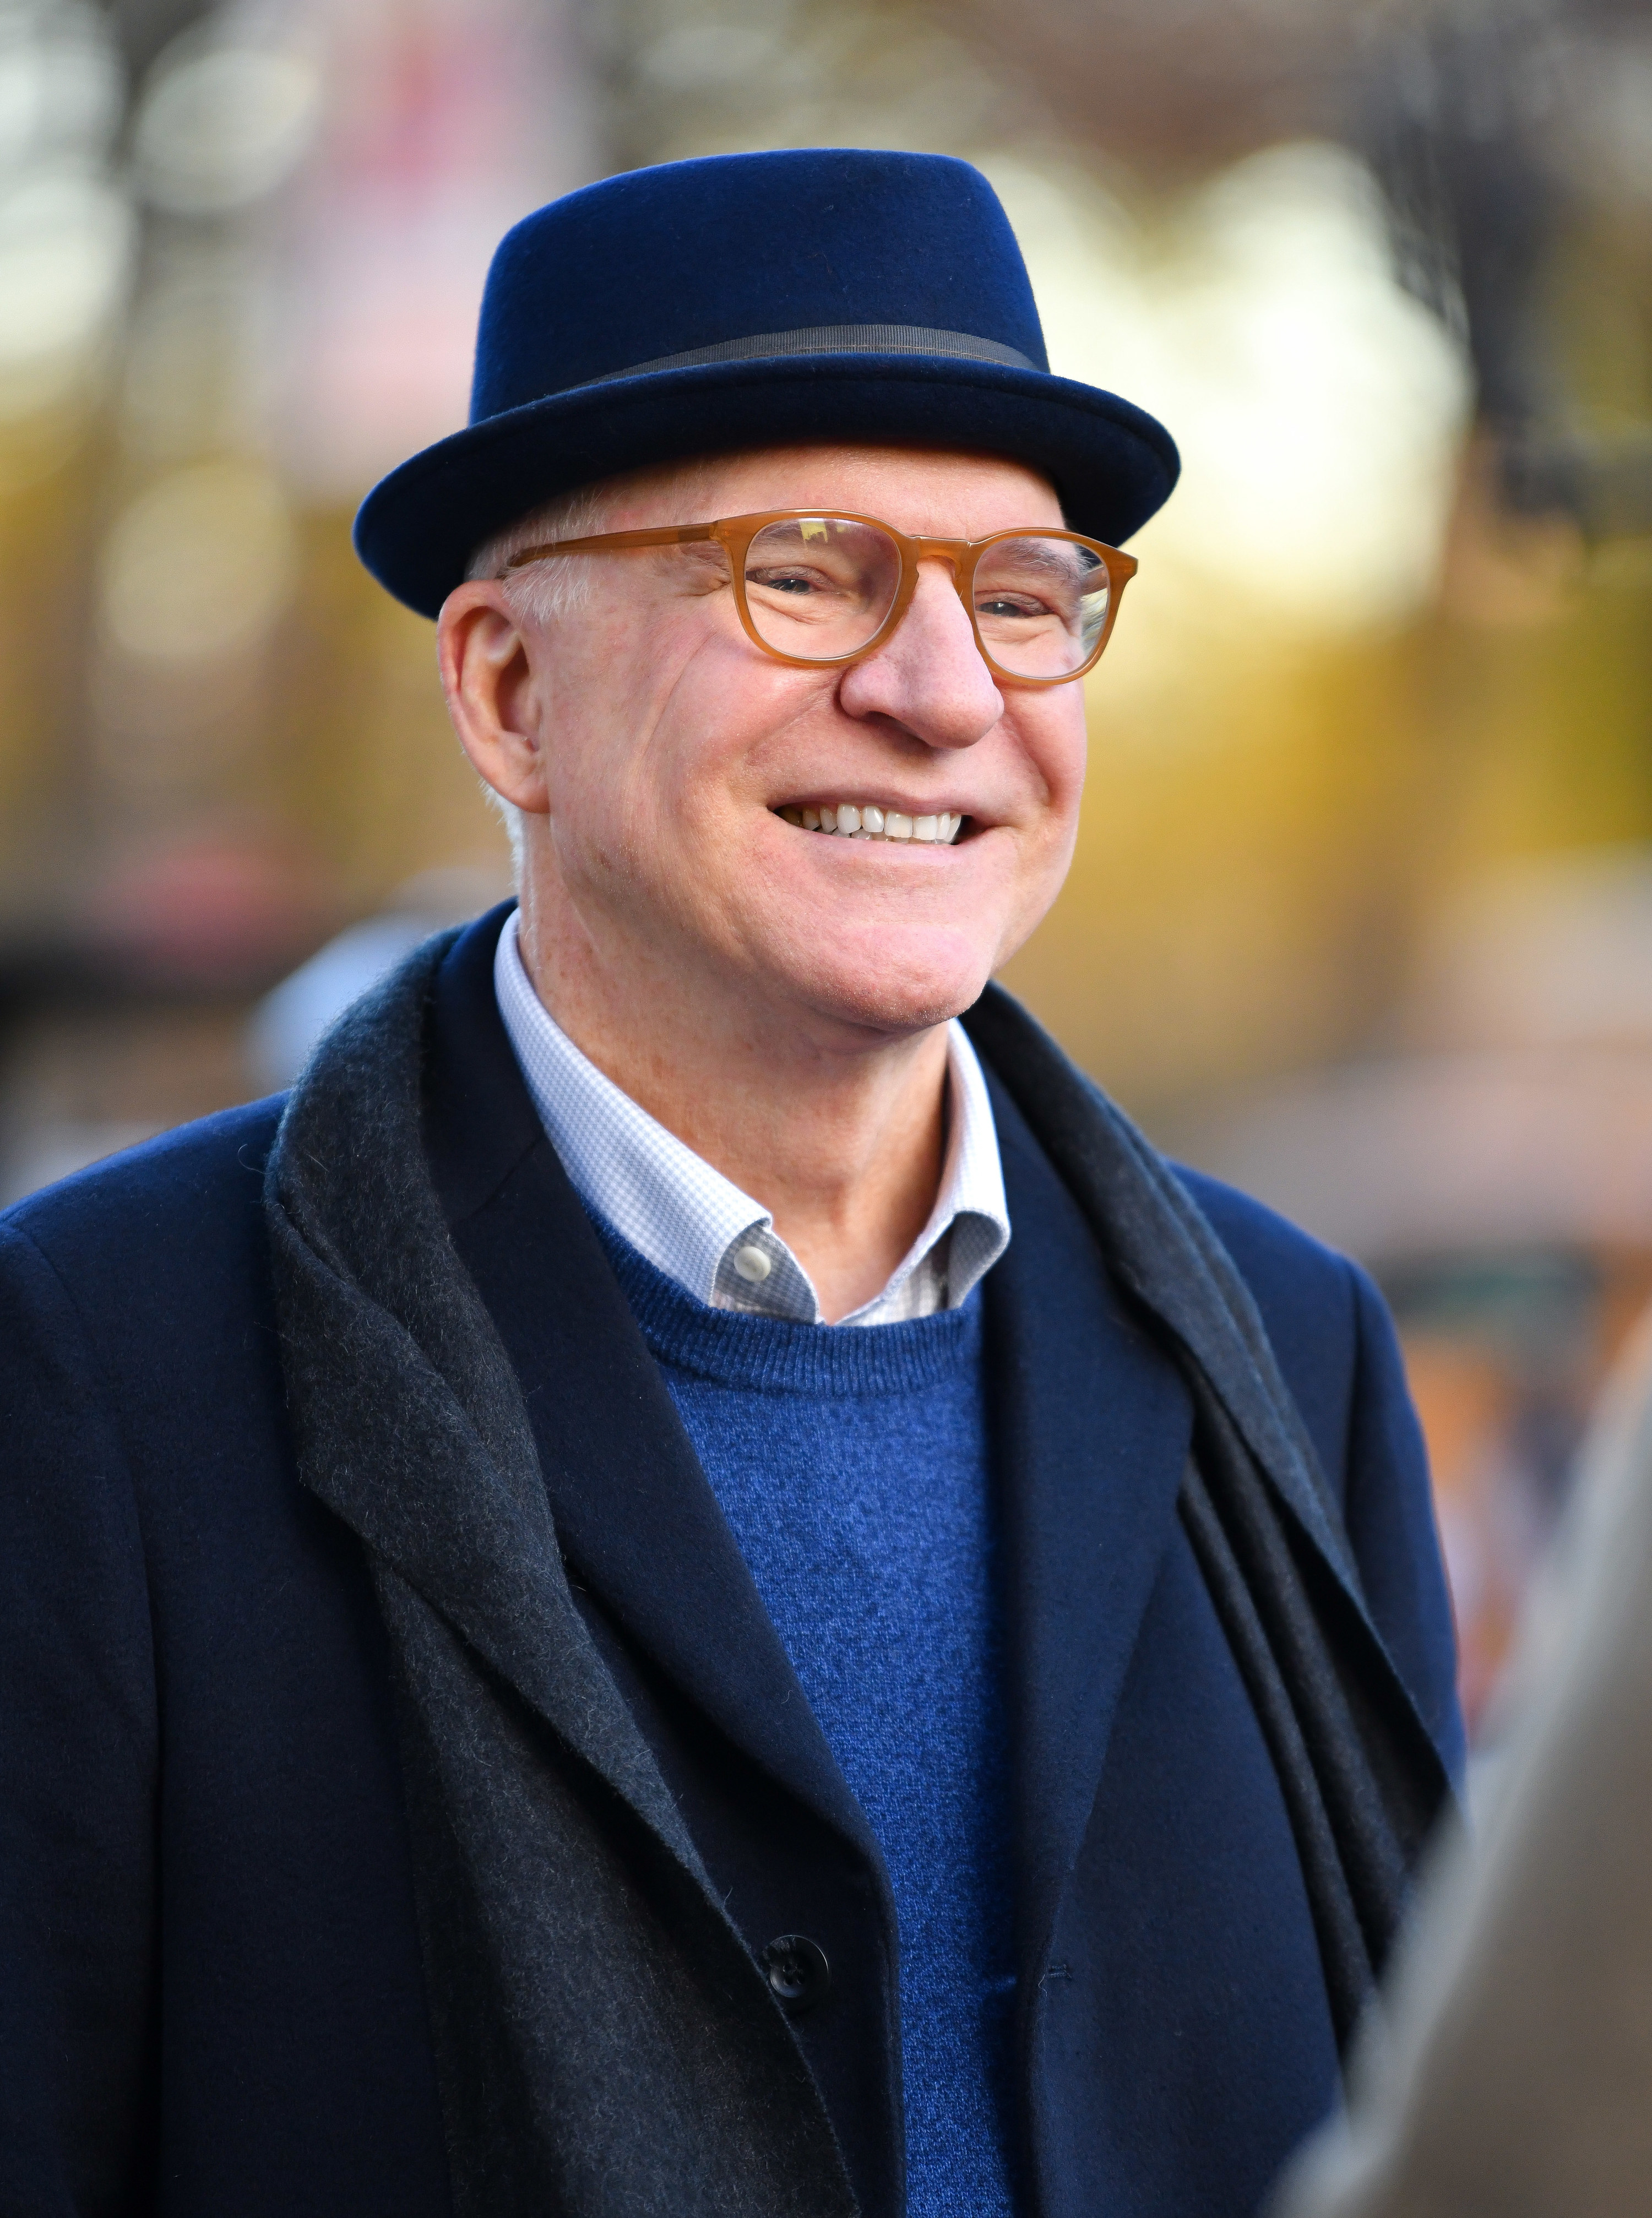 Steve Martin smiles wide while wearing a hat and glasses